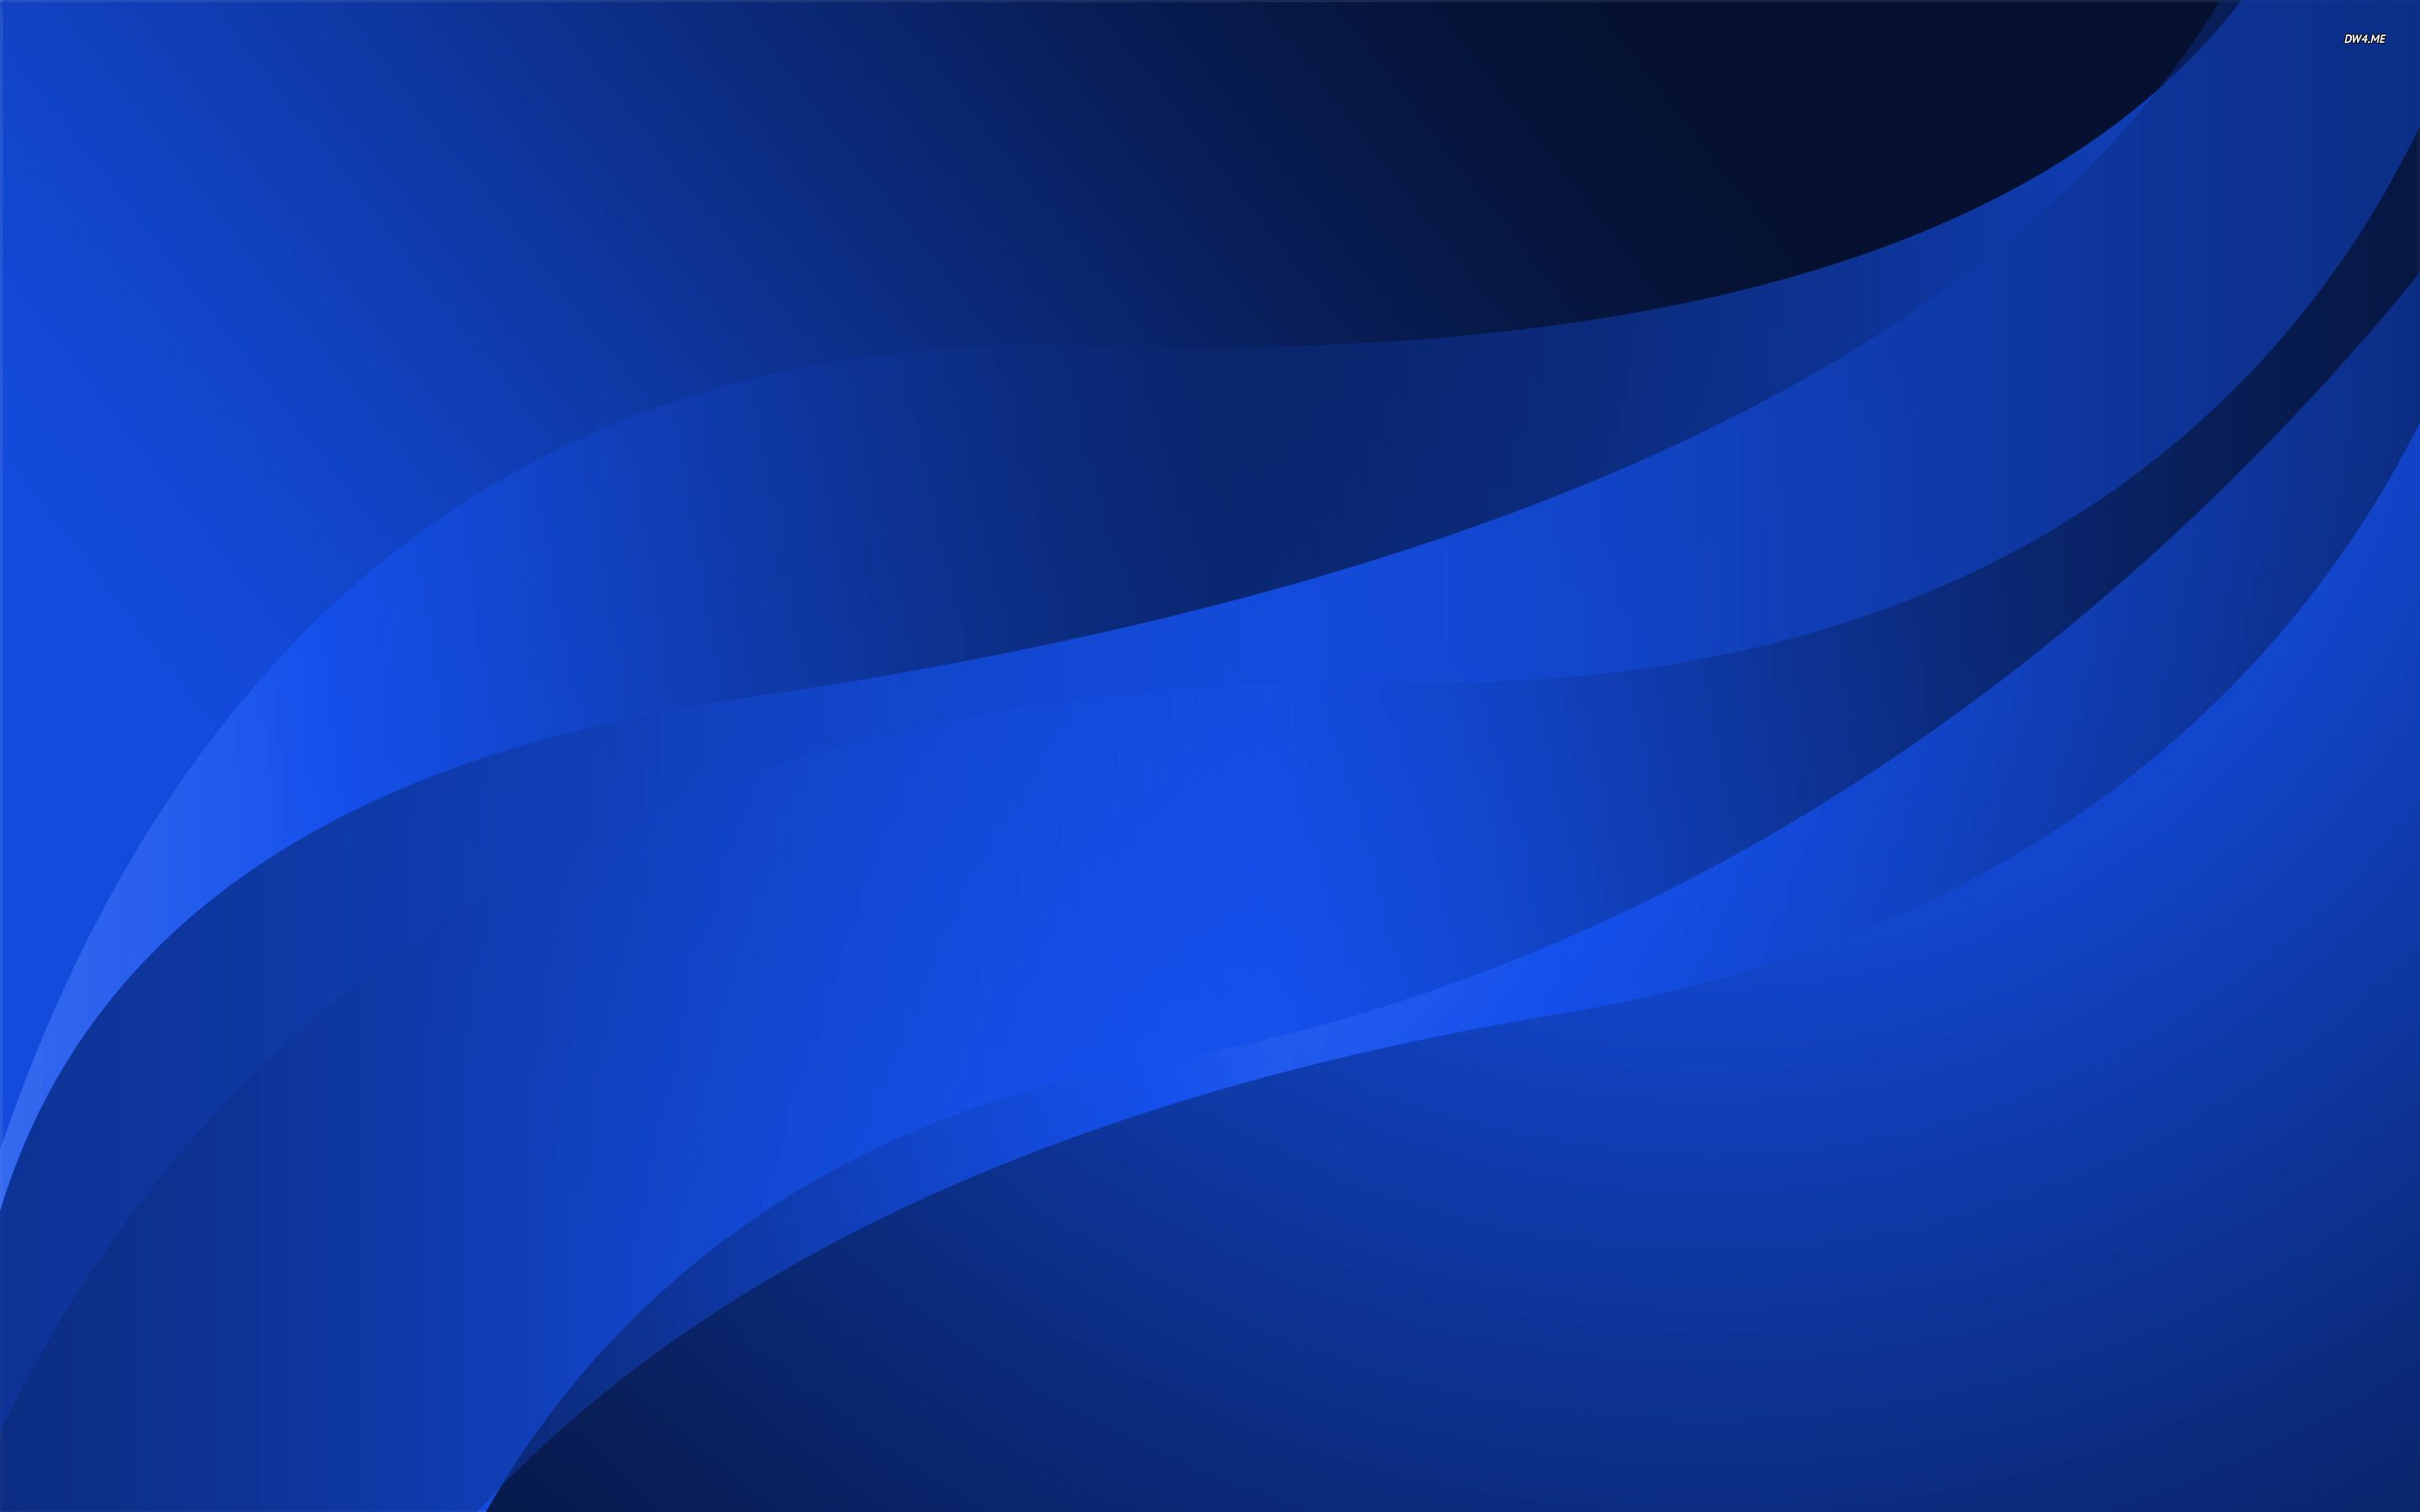 2165-blue-curves-2880x1800-abstract-wallpaper - Chelsea FC online